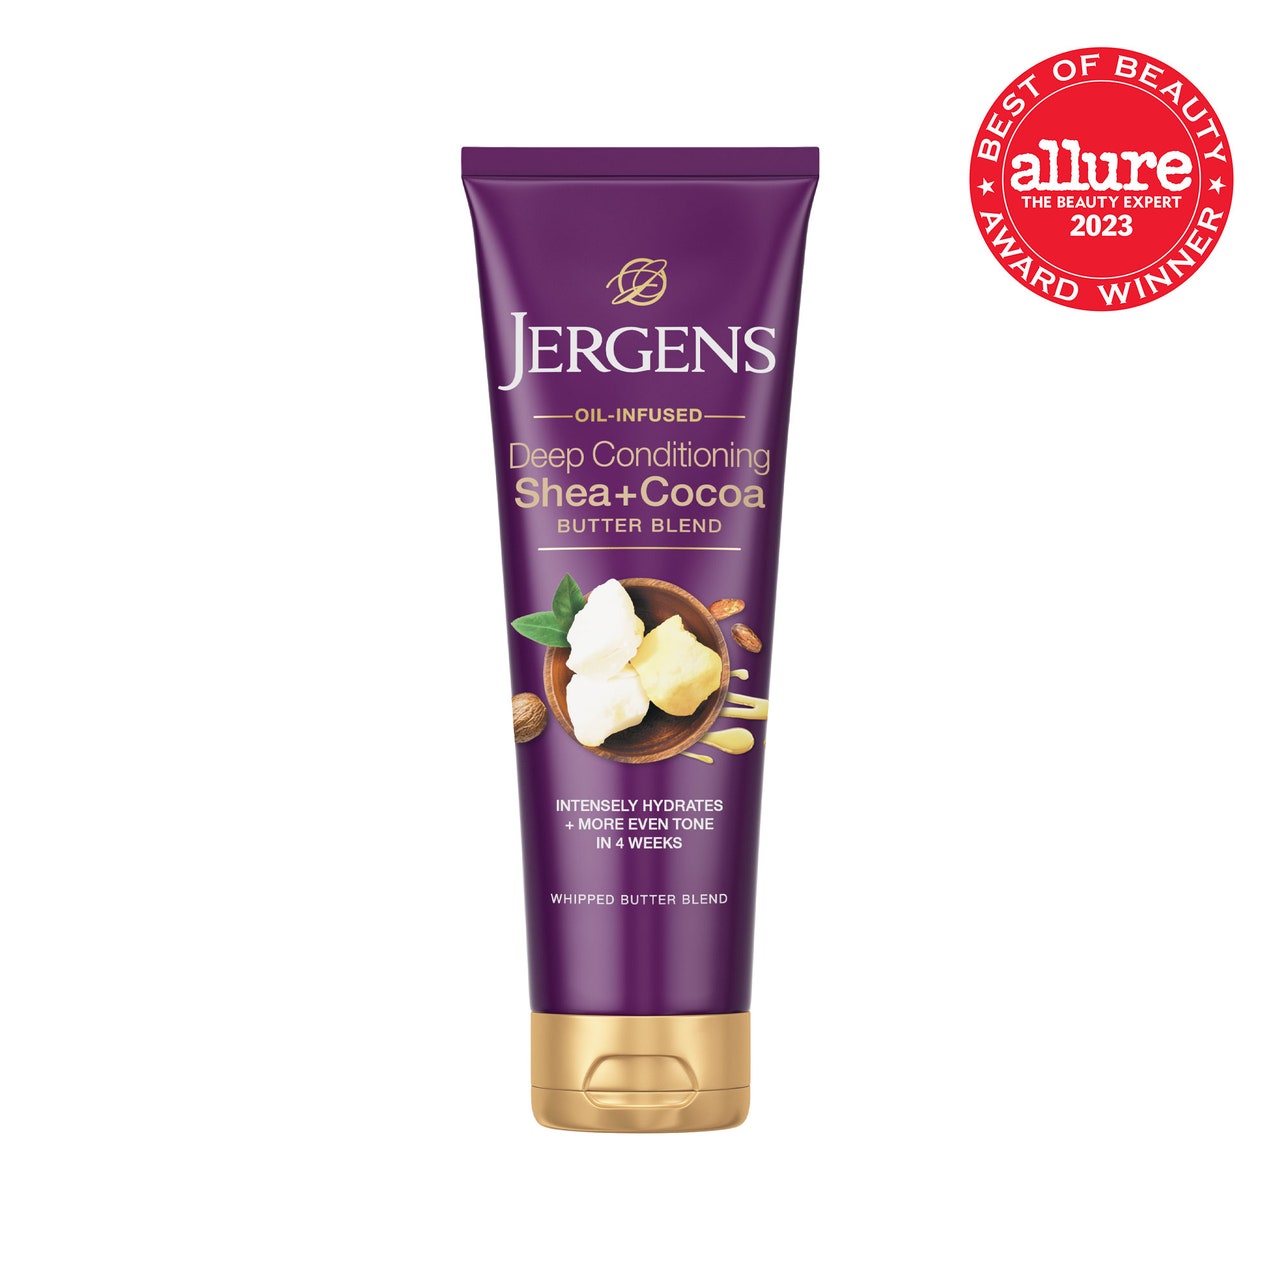 Jergens Deep Conditioning Shea + Cocoa Butter Blend purple tube with gold cap on white background with red Allure BoB seal in the top right corner